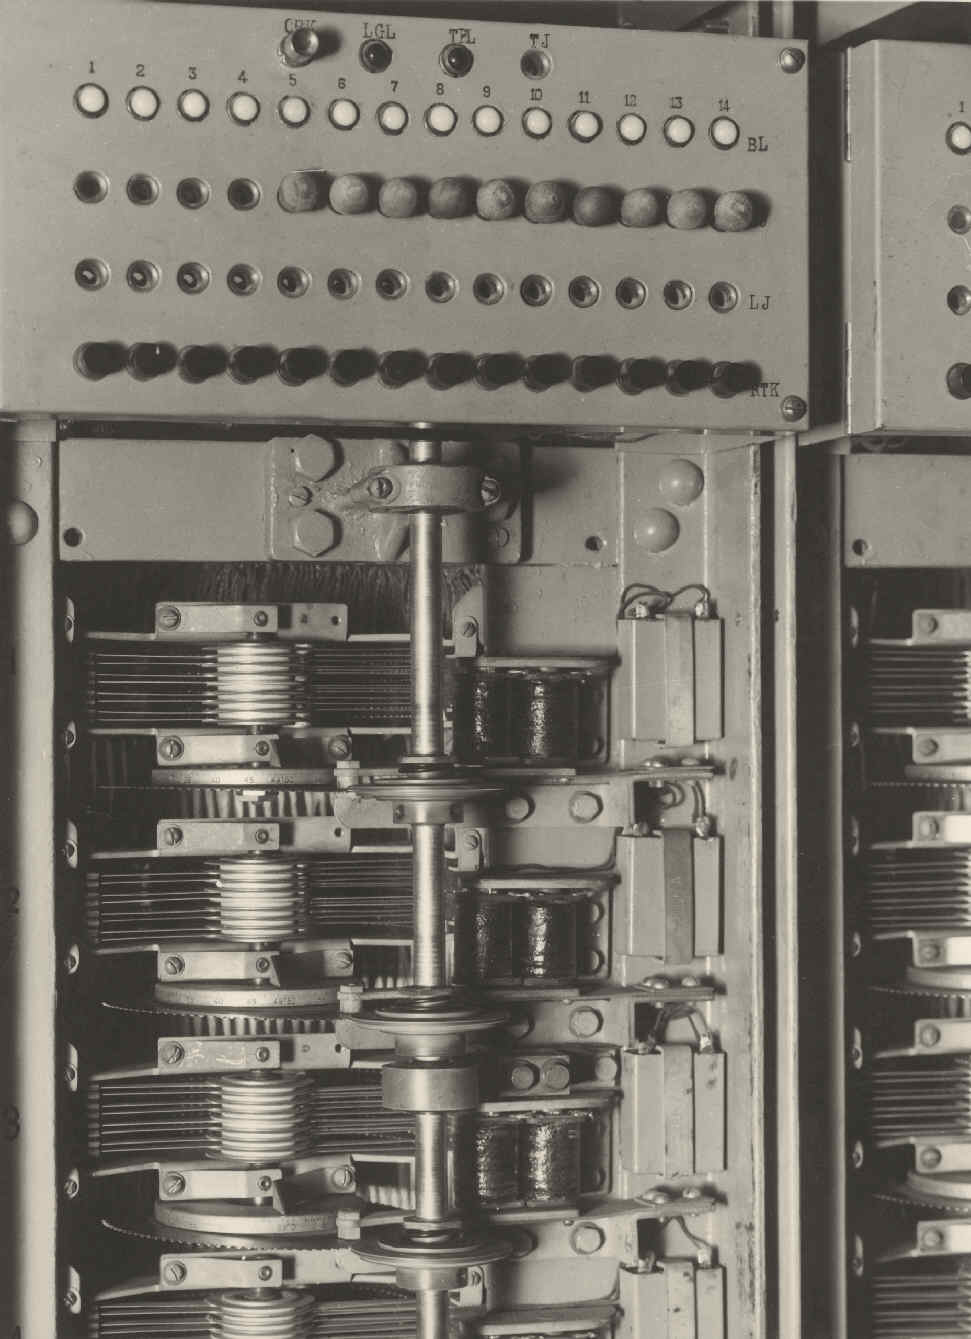 Jordan Power Station. Partial view of a 1st search engine rack showing the test panel, jacks and occupancy and overload lamps.